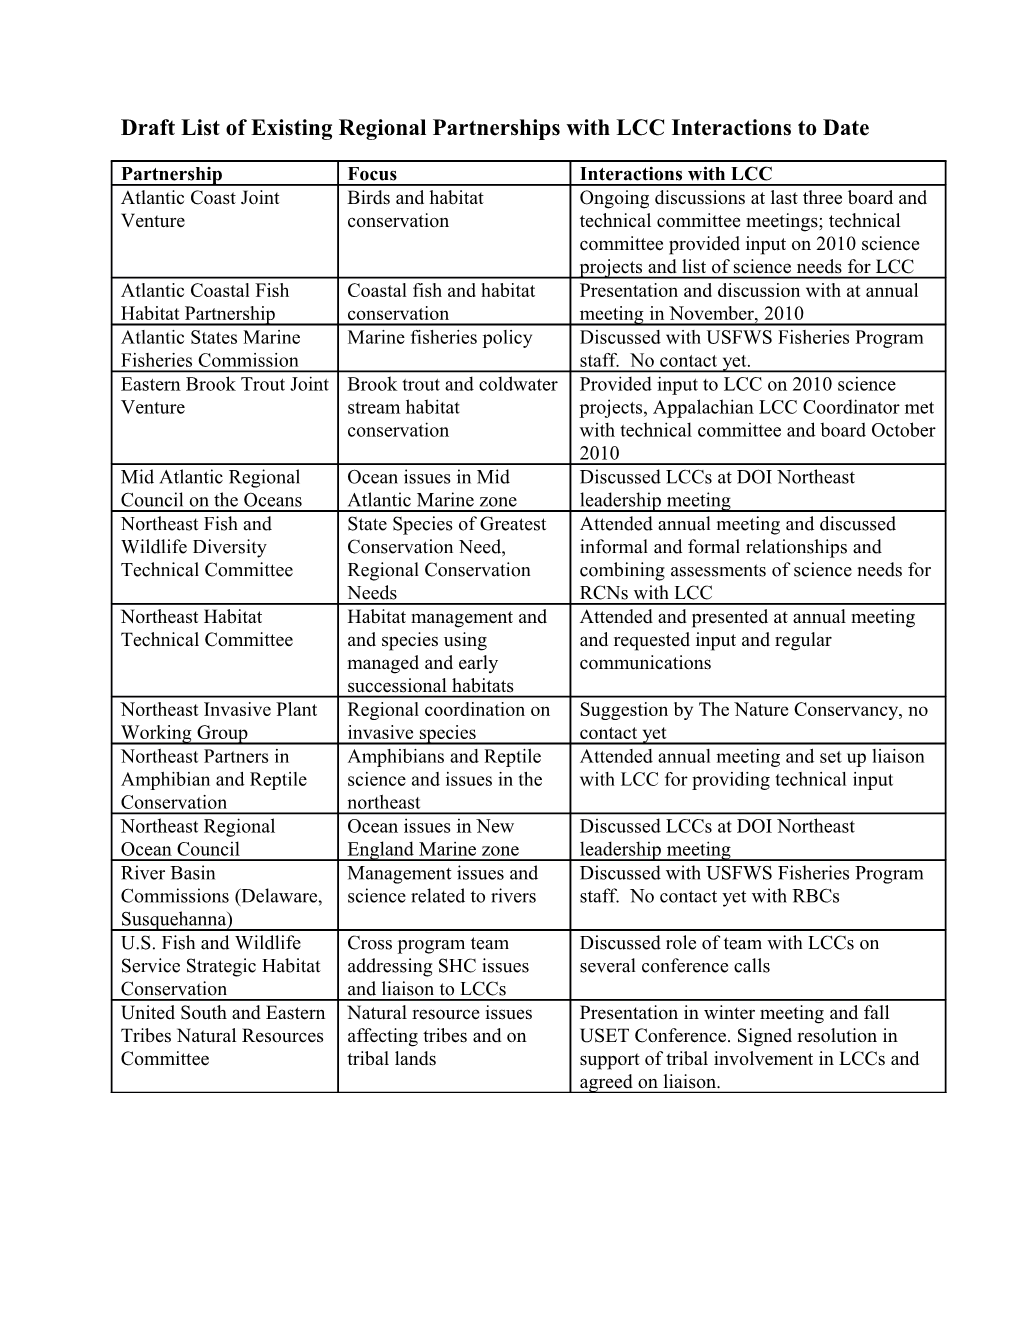 Draft List of Existing Regional Partnerships with LCC Interactions to Date